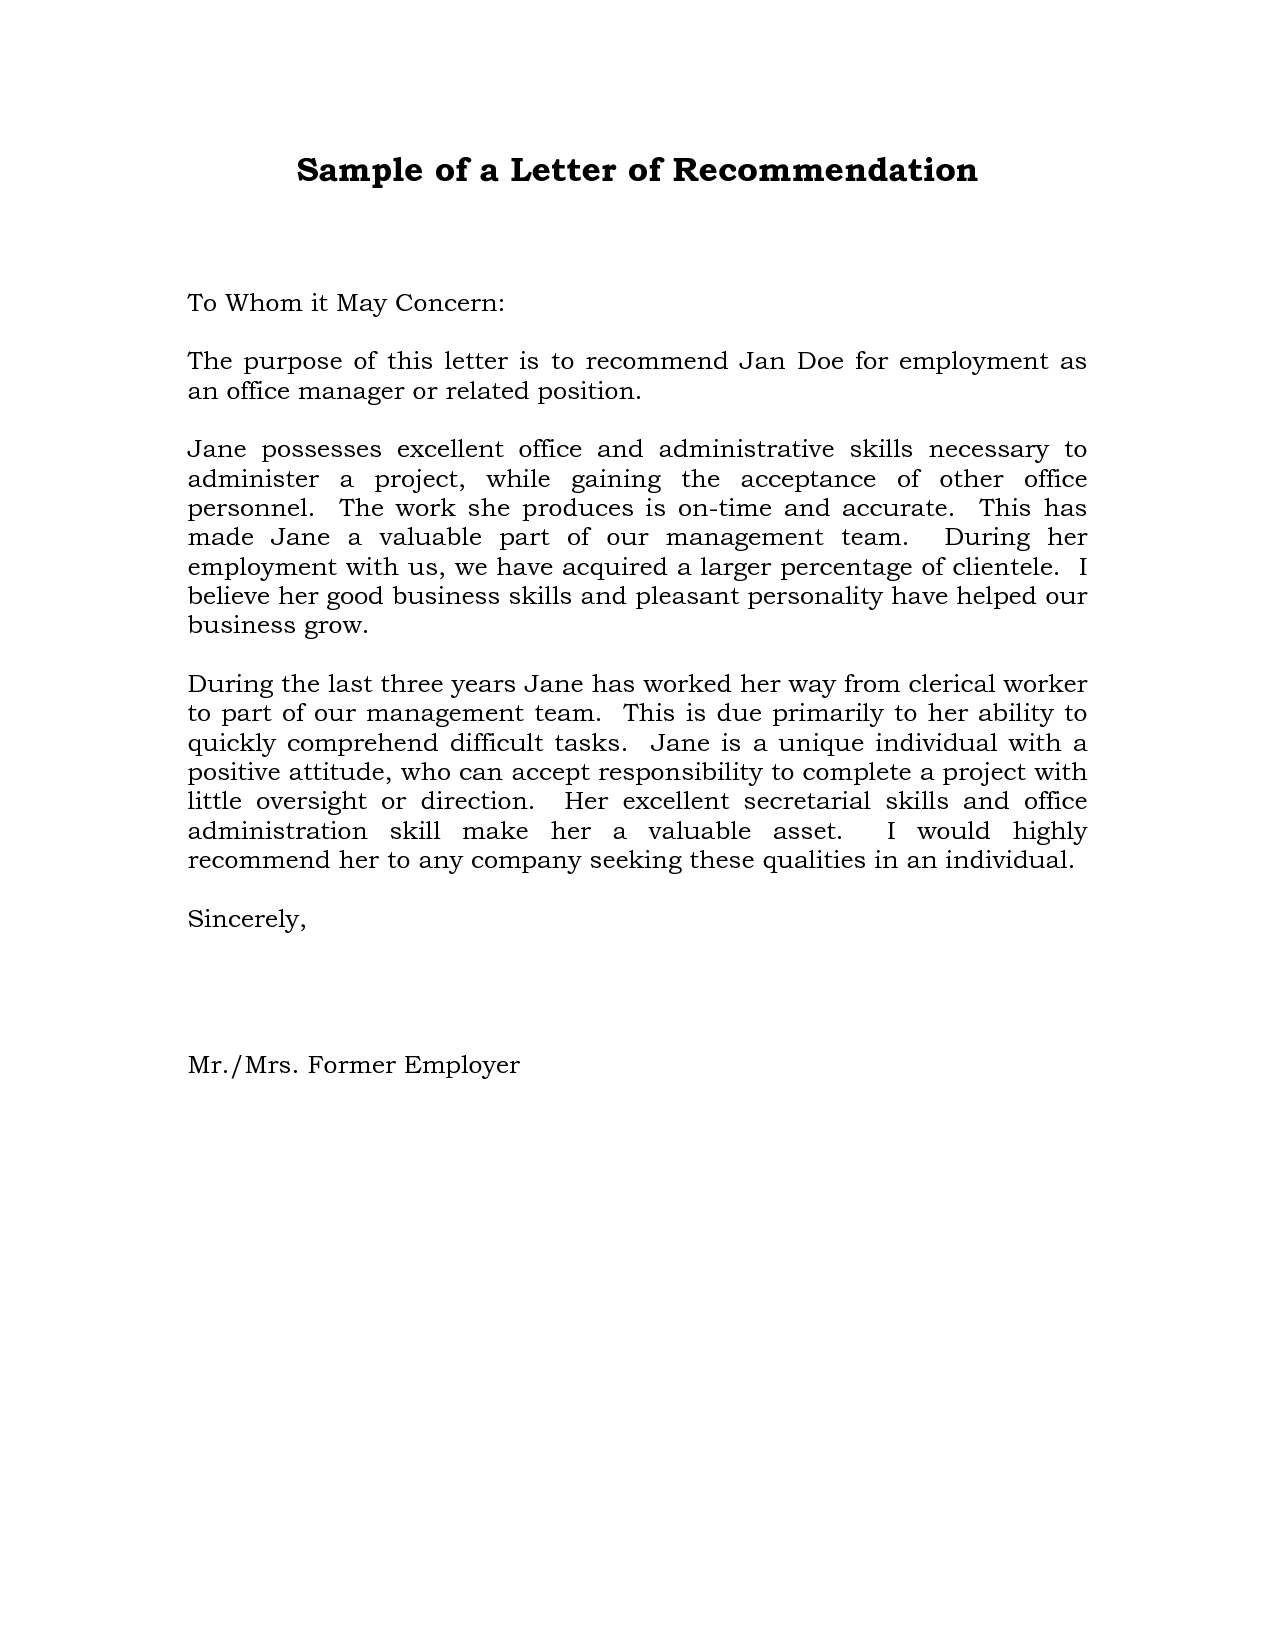 Reference Letter Of Recommendation Sample Sample Manager within dimensions 1275 X 1650